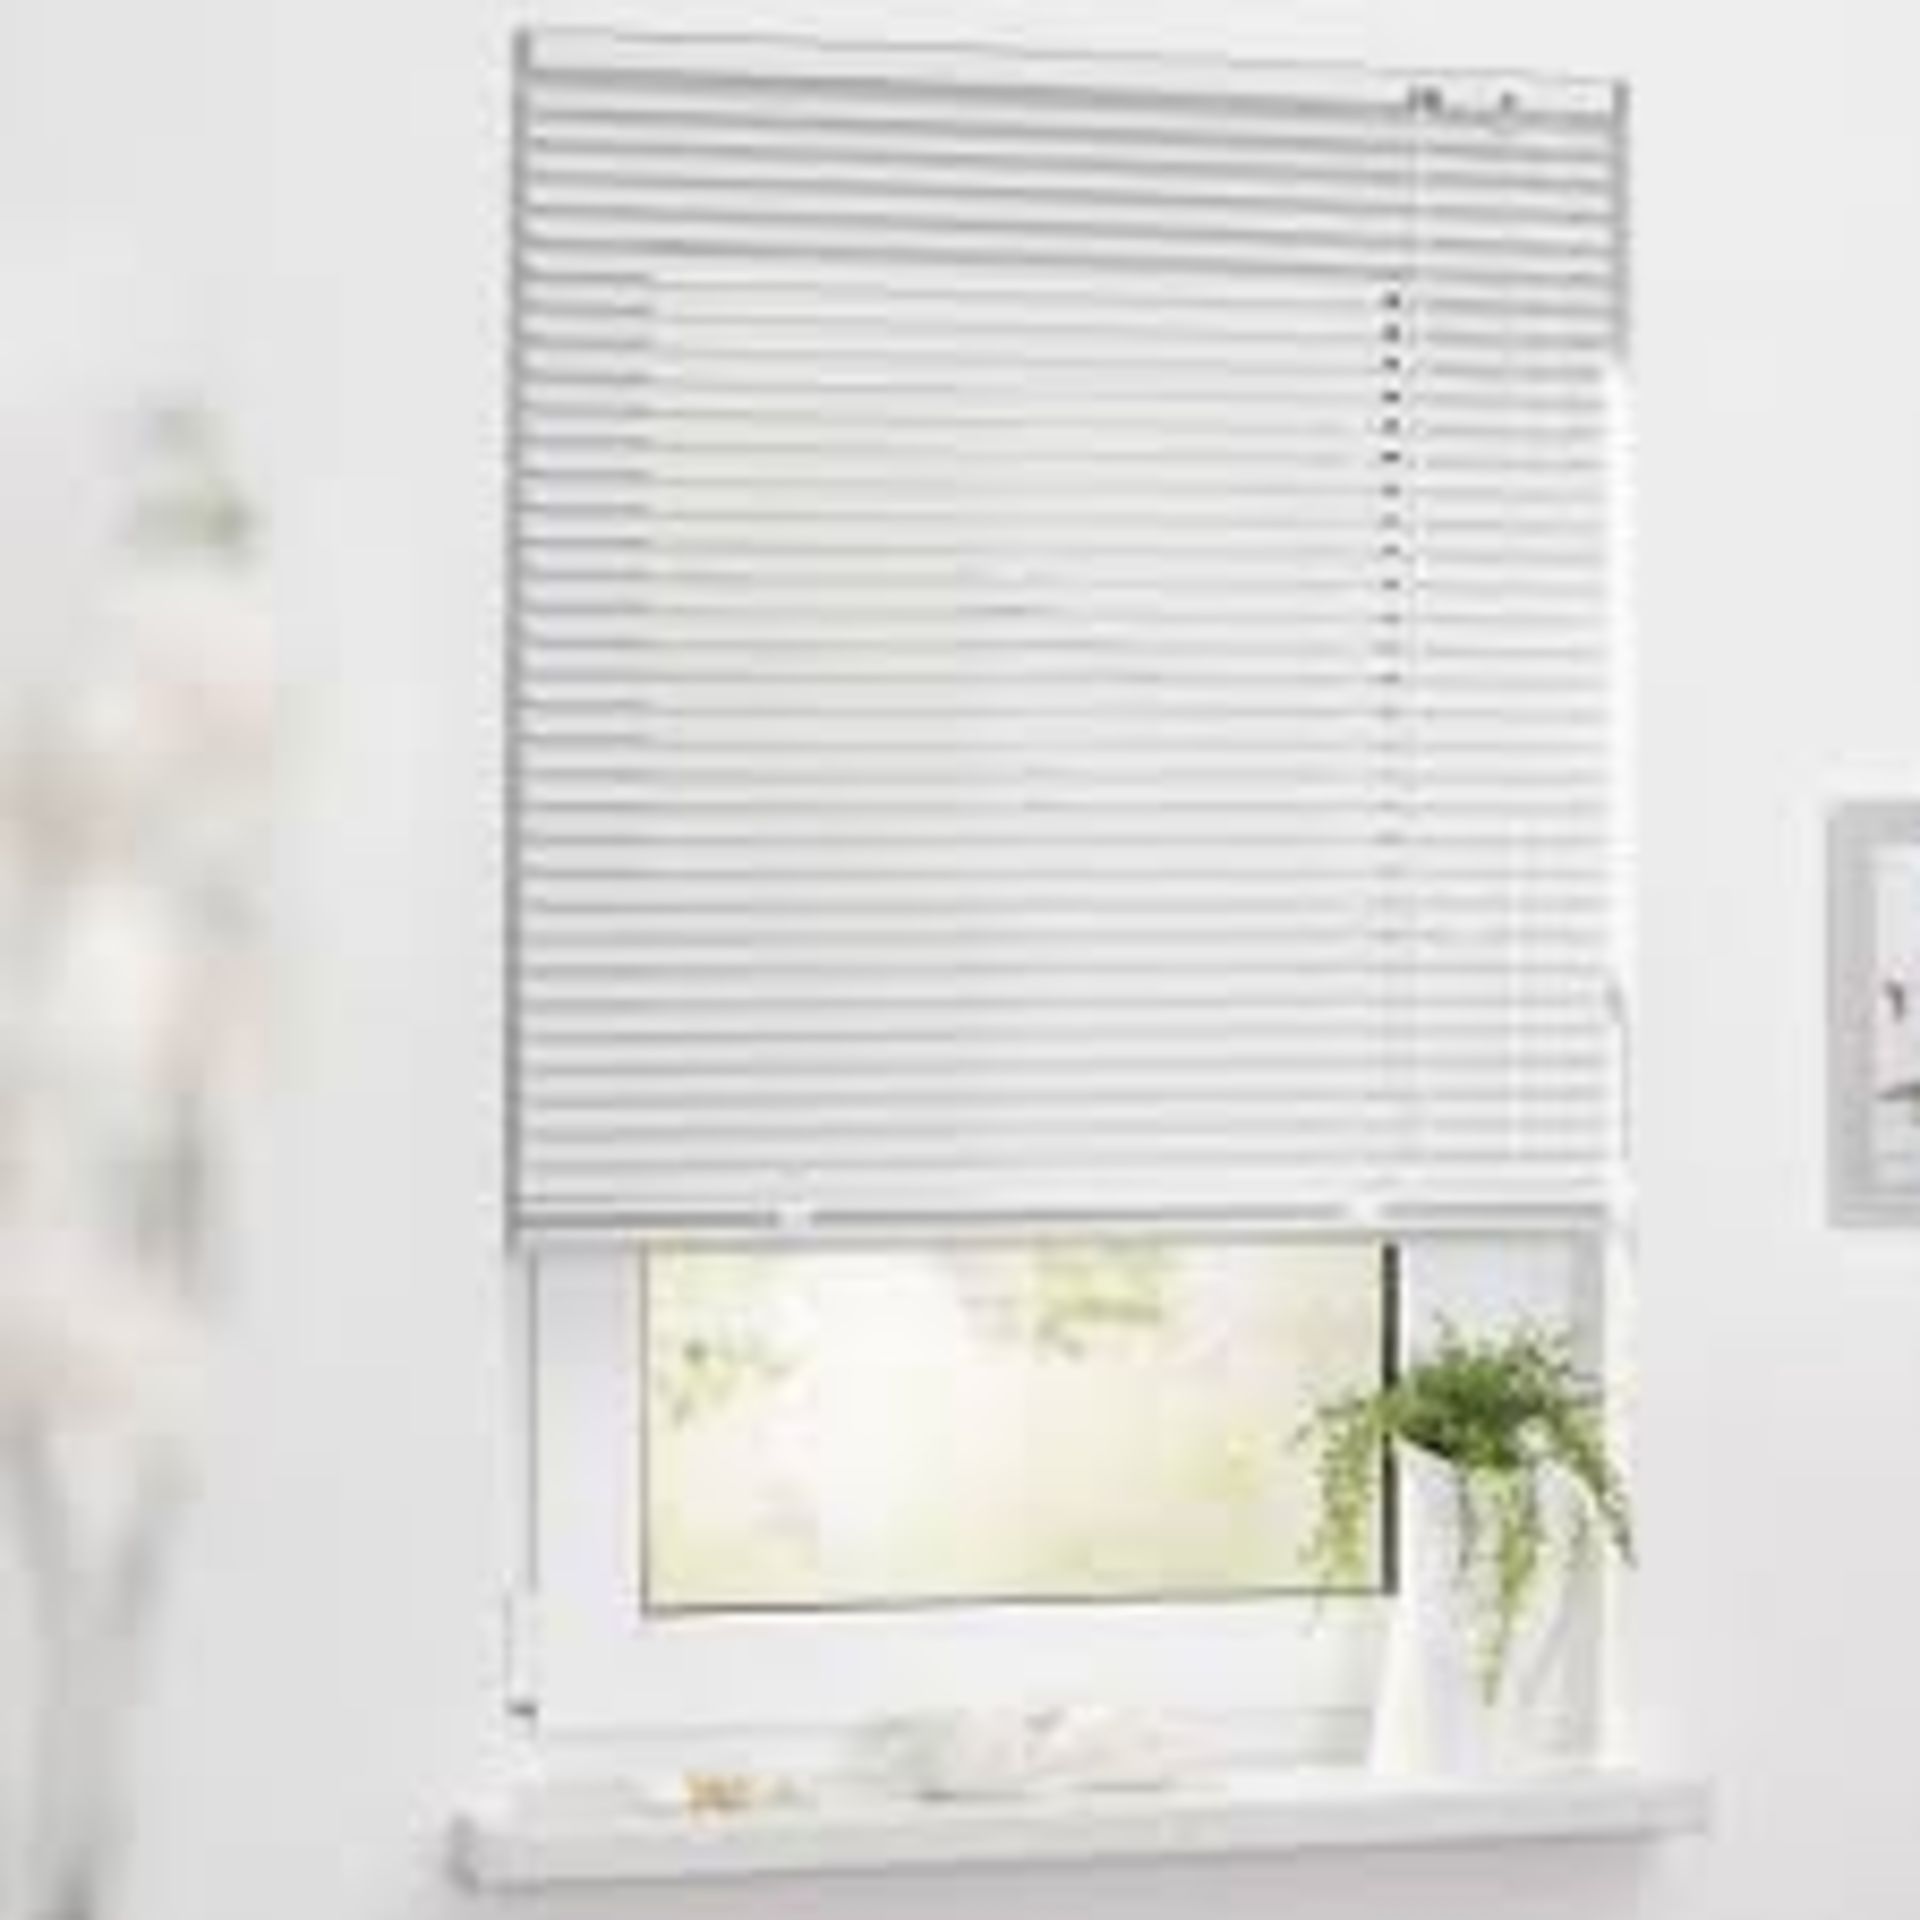 Assorted Small Venetian Blinds & Roman Blinds RRP £18 Each (16816) (Pictures Are For Illustration